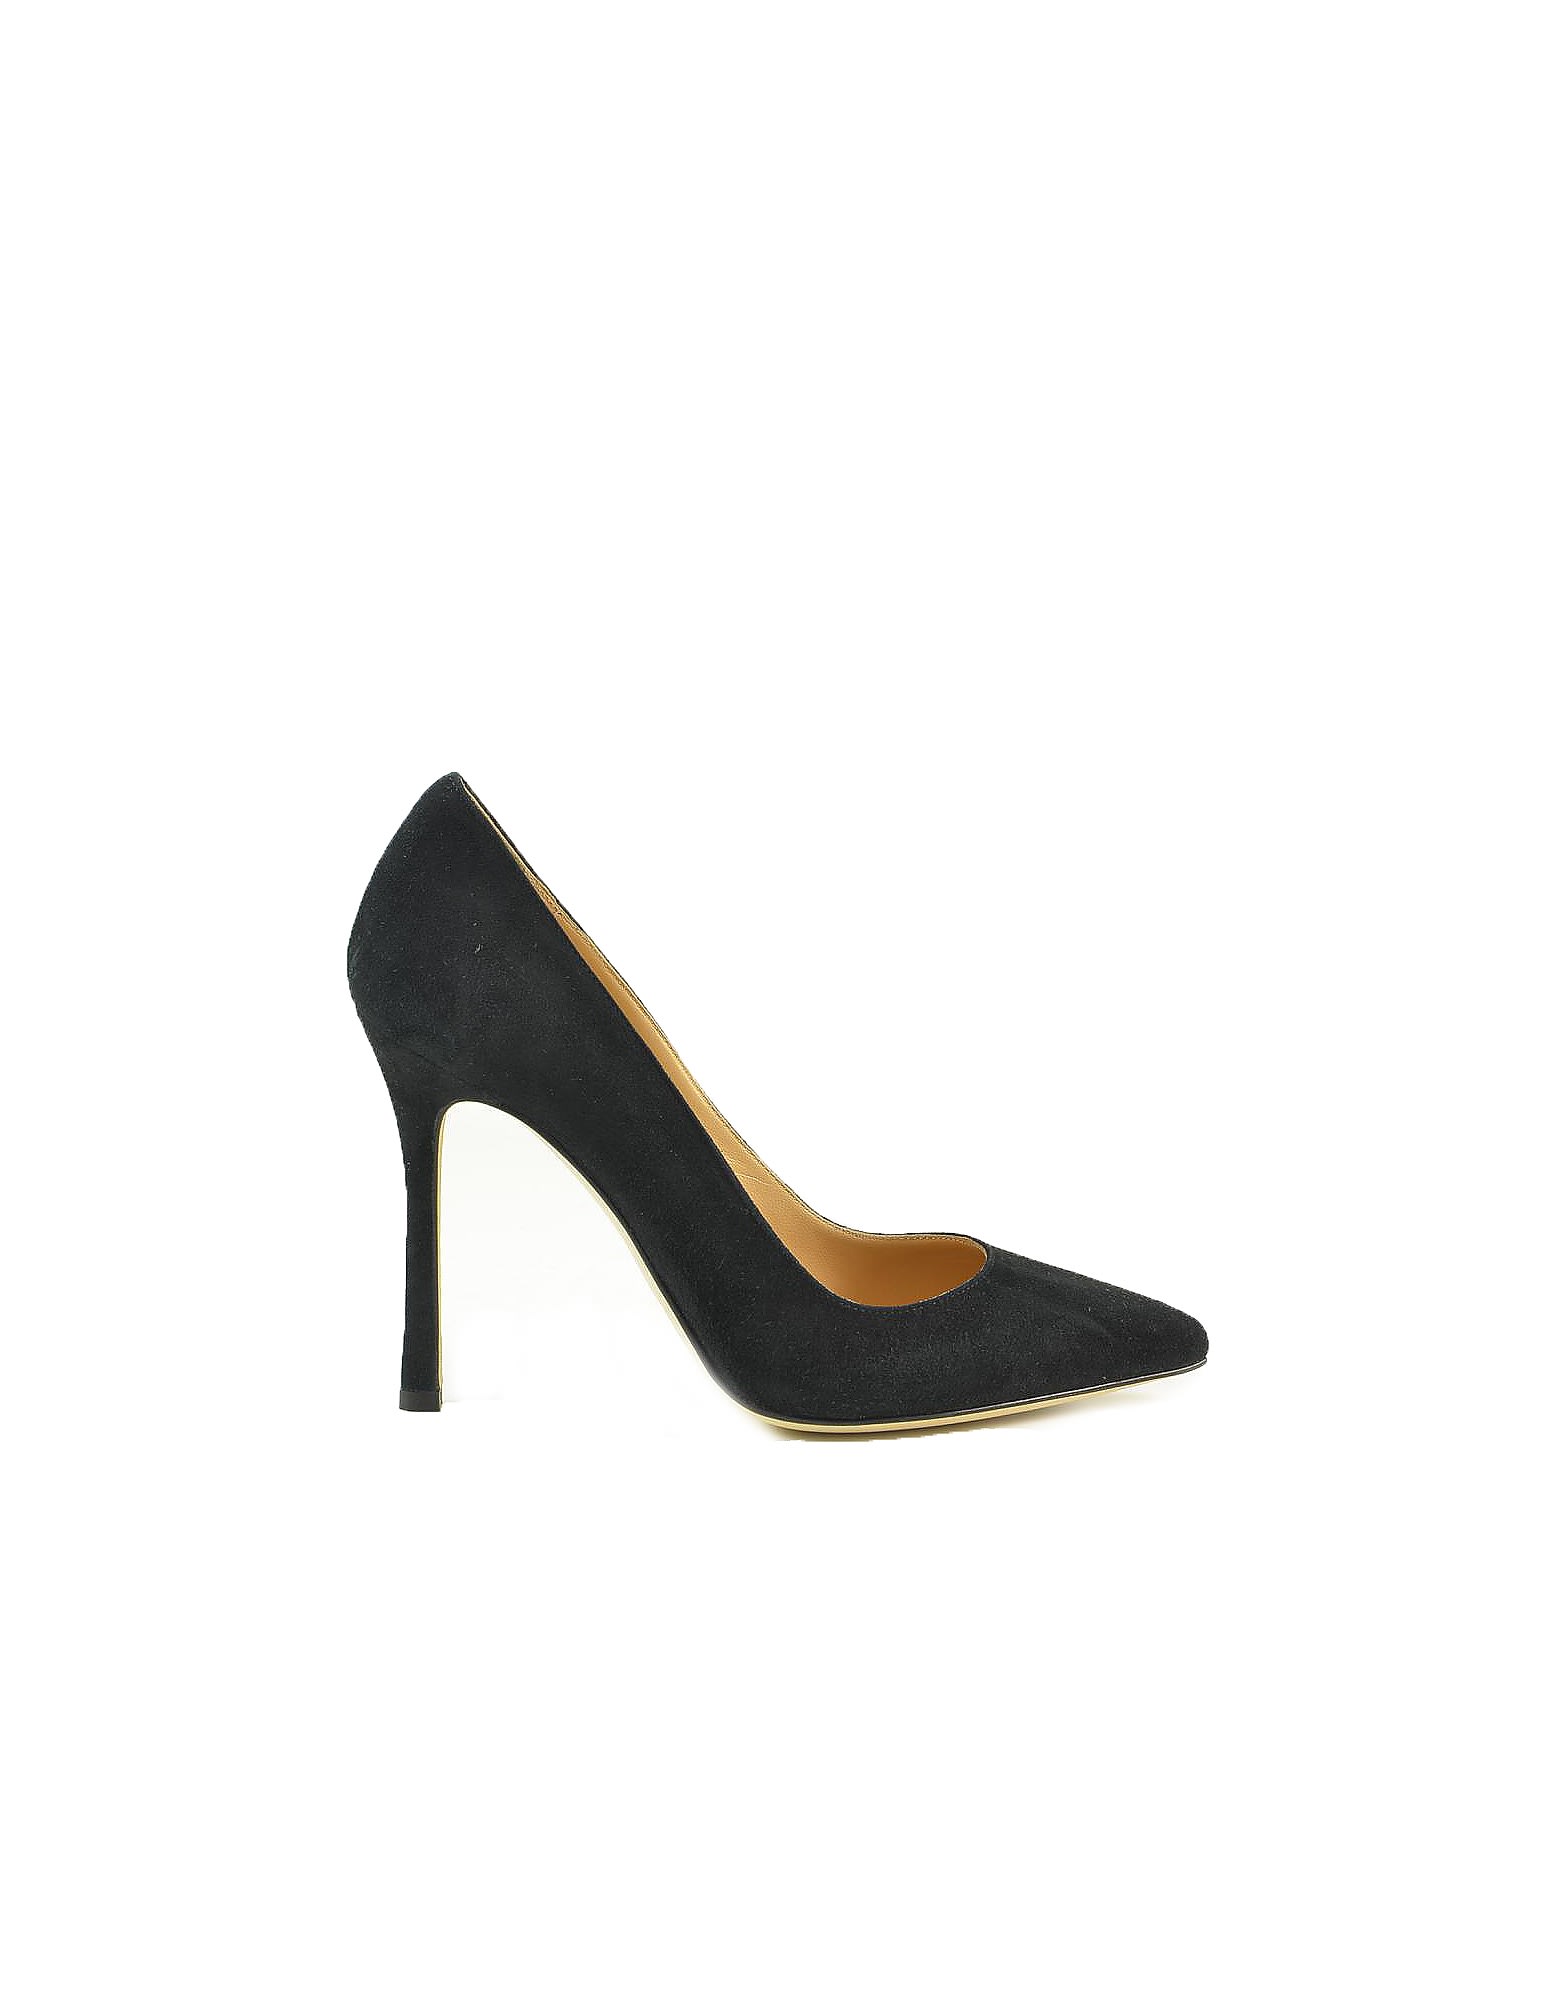 Buy Sergio Rossi Black Suede High Heel Pumps online, shop Sergio Rossi shoes with free shipping